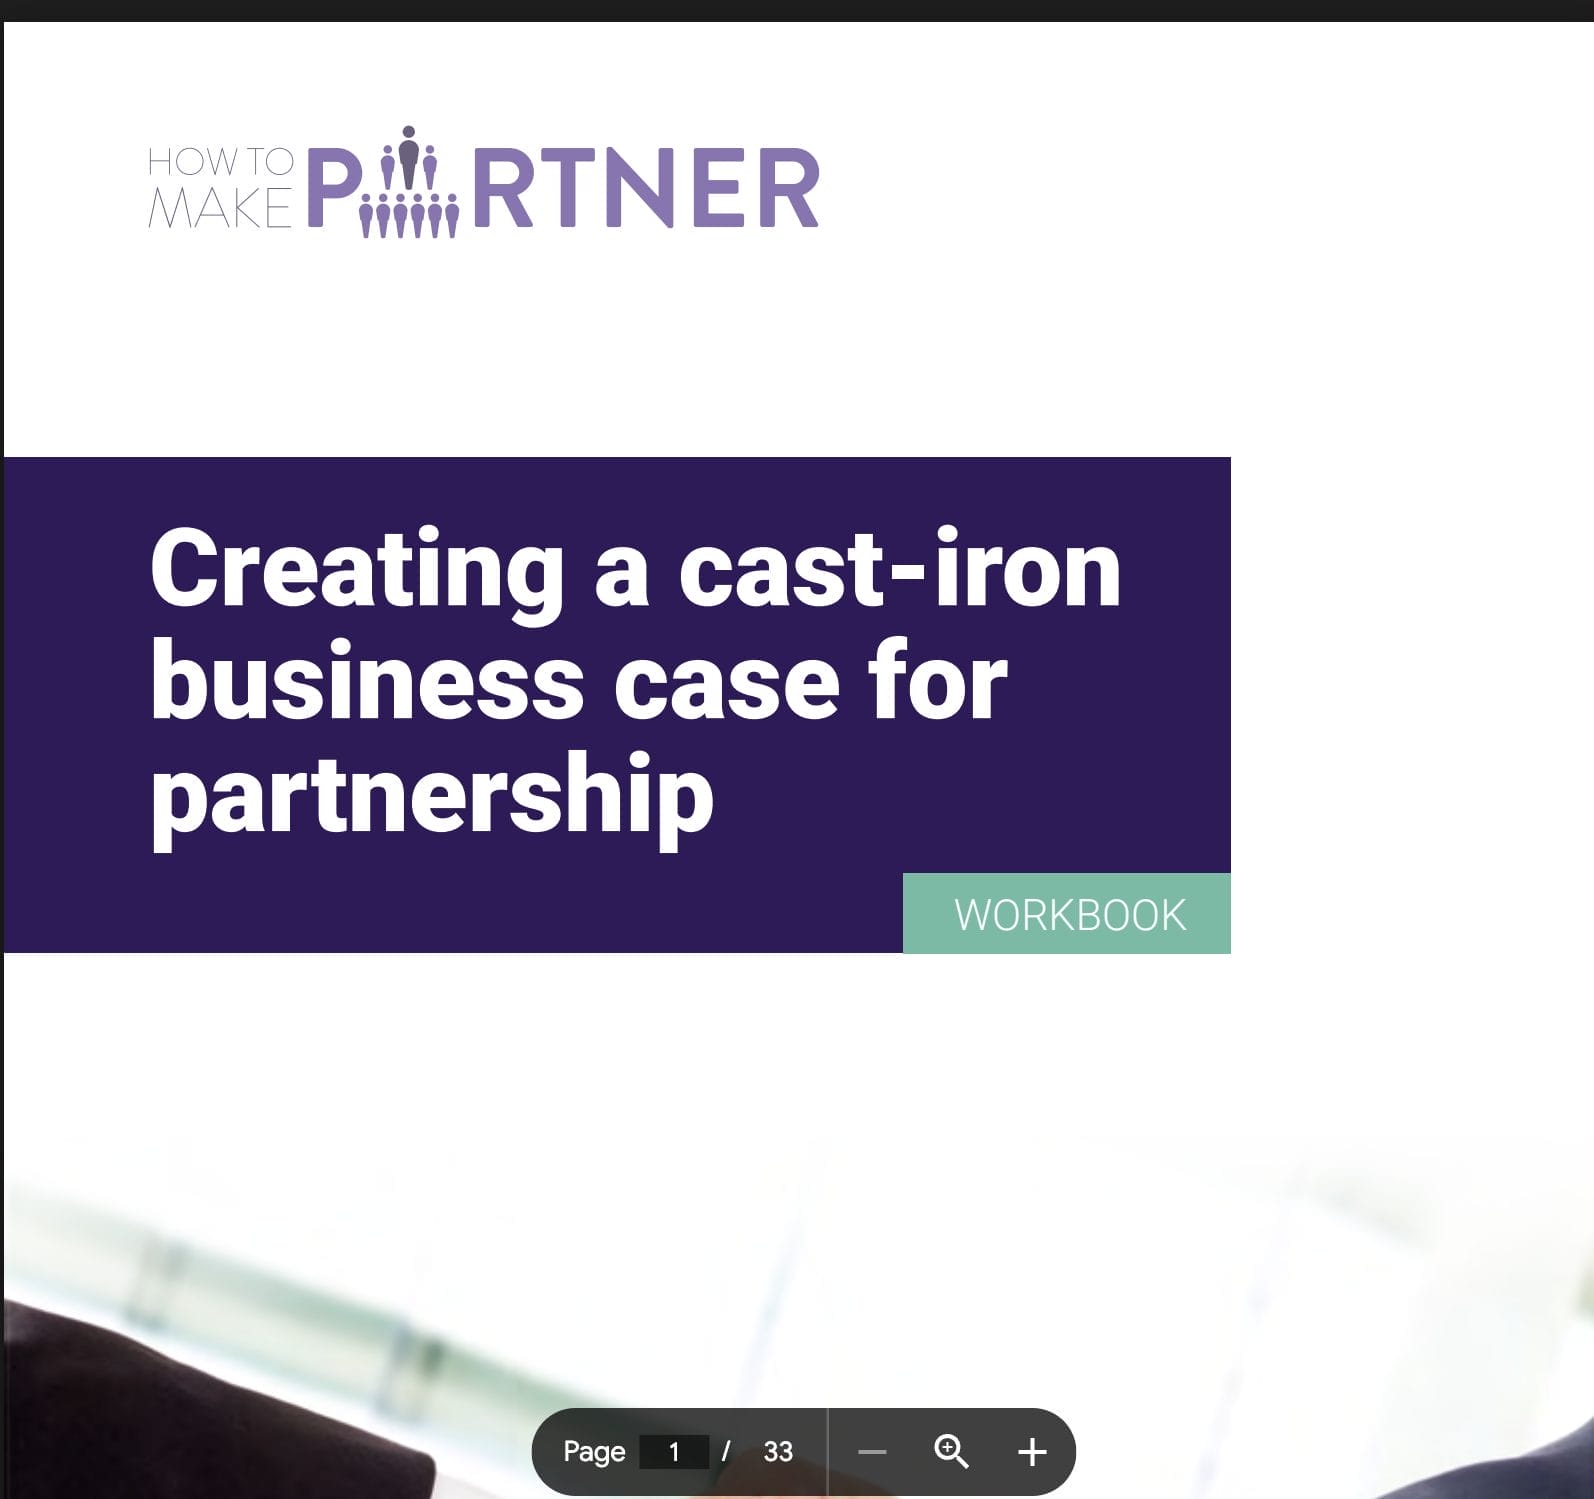 How to build a Cast-Iron Business Case for Partner